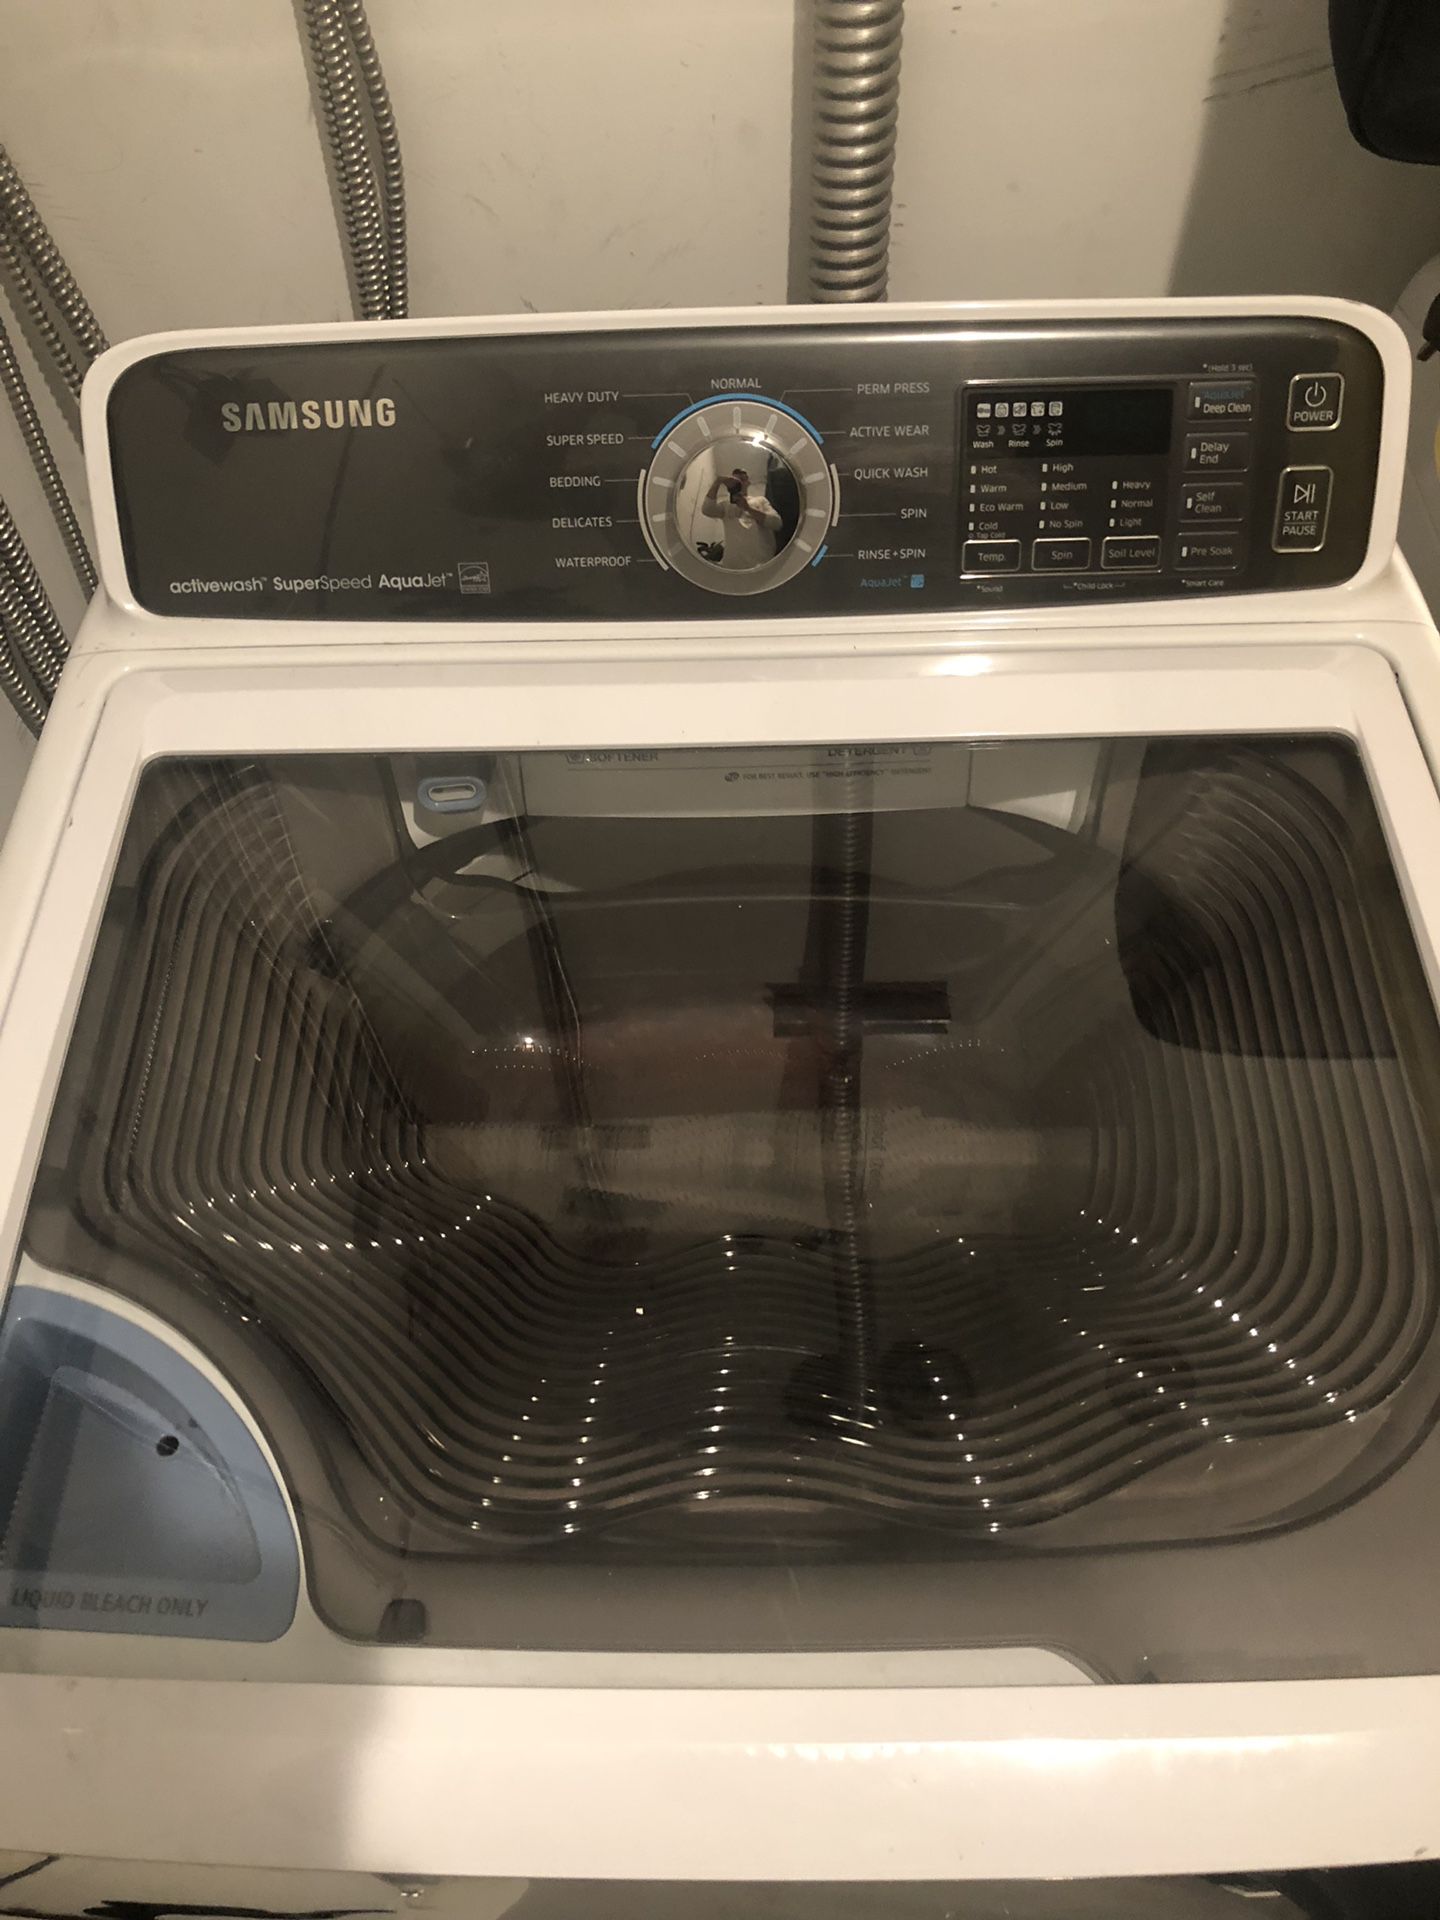 Samsung washer/dryer for sale! Need gone ASAP!